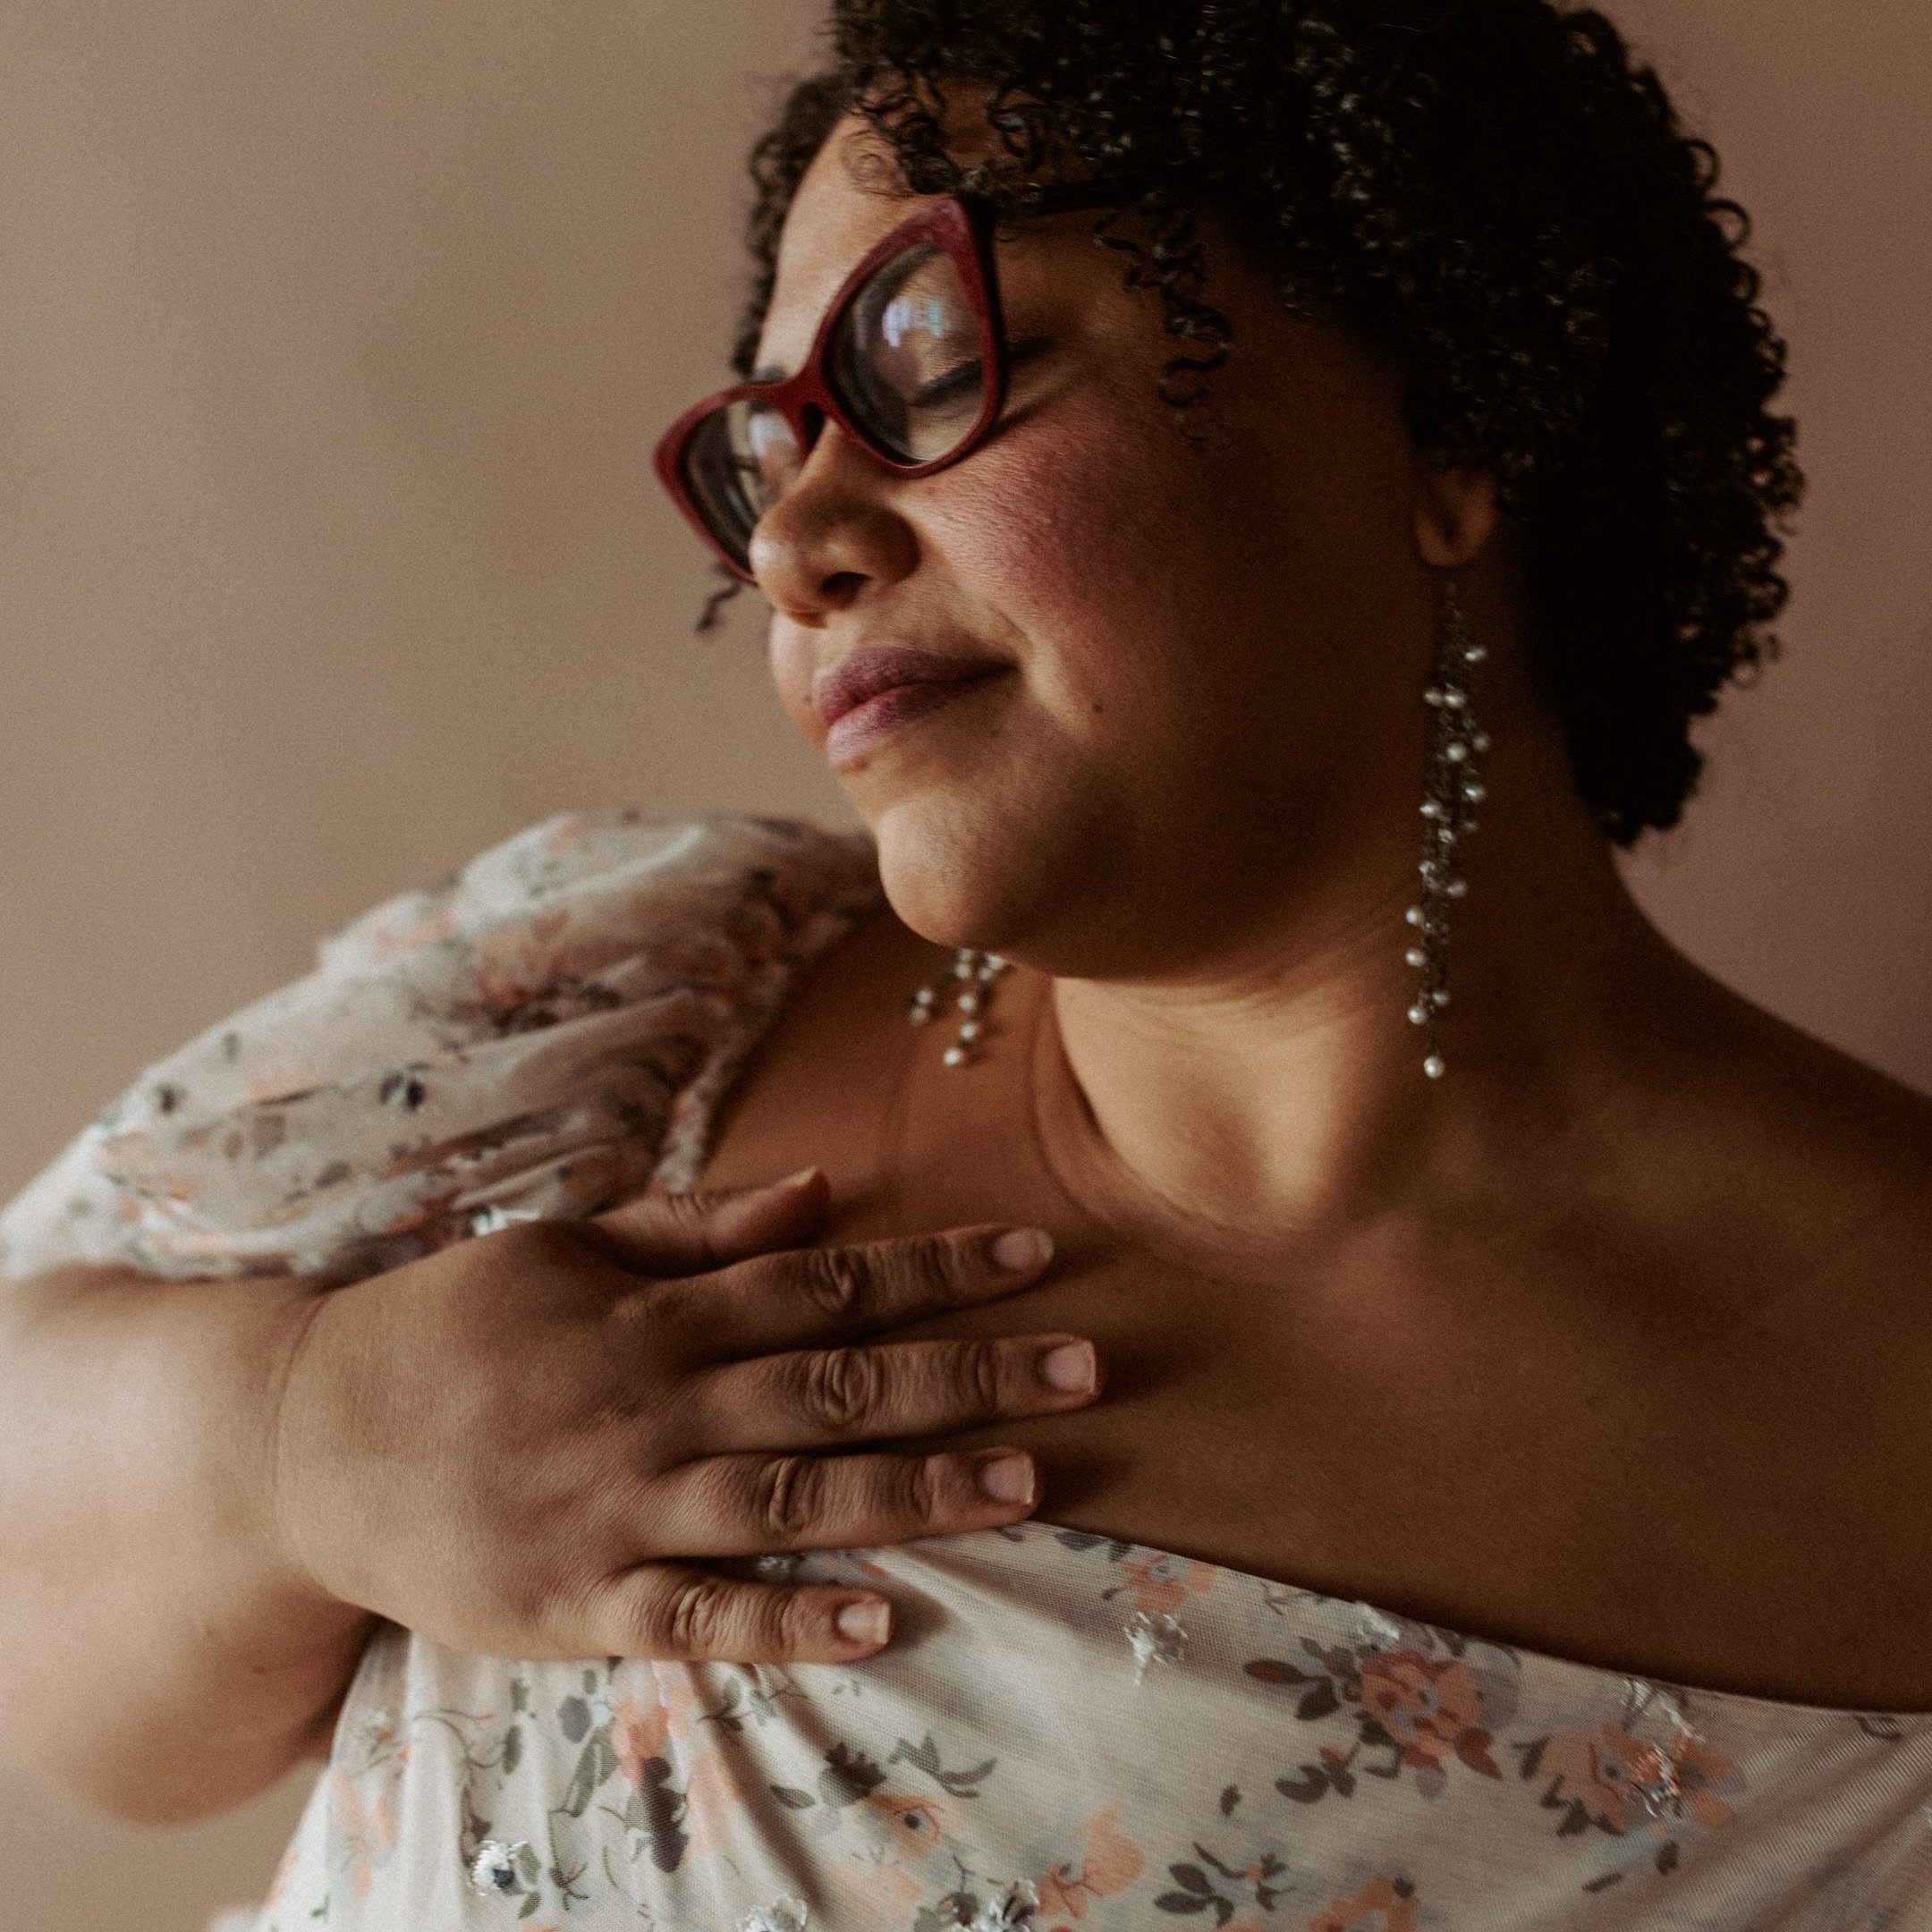 You deserve to have a good relationship with your body. Your body deserves your love, support, and respect. &hearts;️
.
.
.
.
.
[Image Description: A Black woman in a larger body with short black curly hair is wearing a cream colored floral dress and